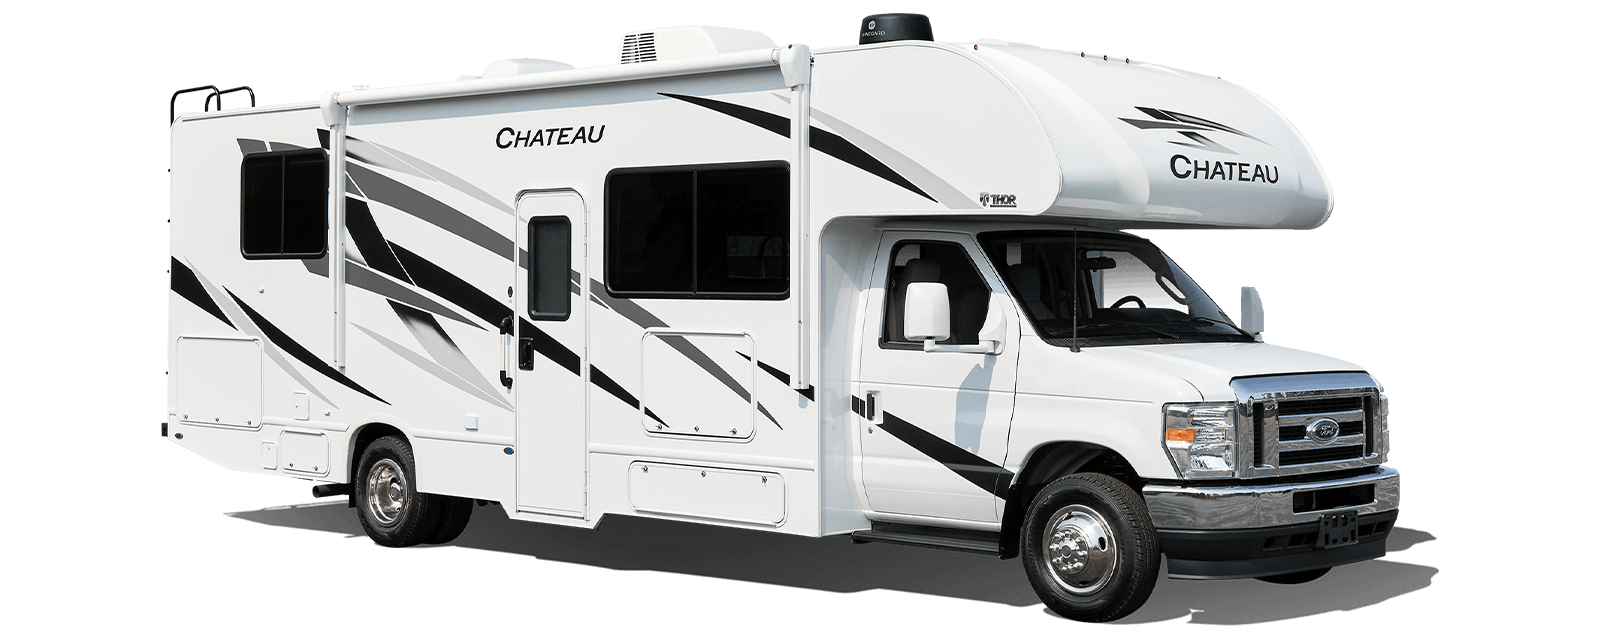 21 Piece Chateau HDMax Beige Small Motorhome Curbside Graphics Kit